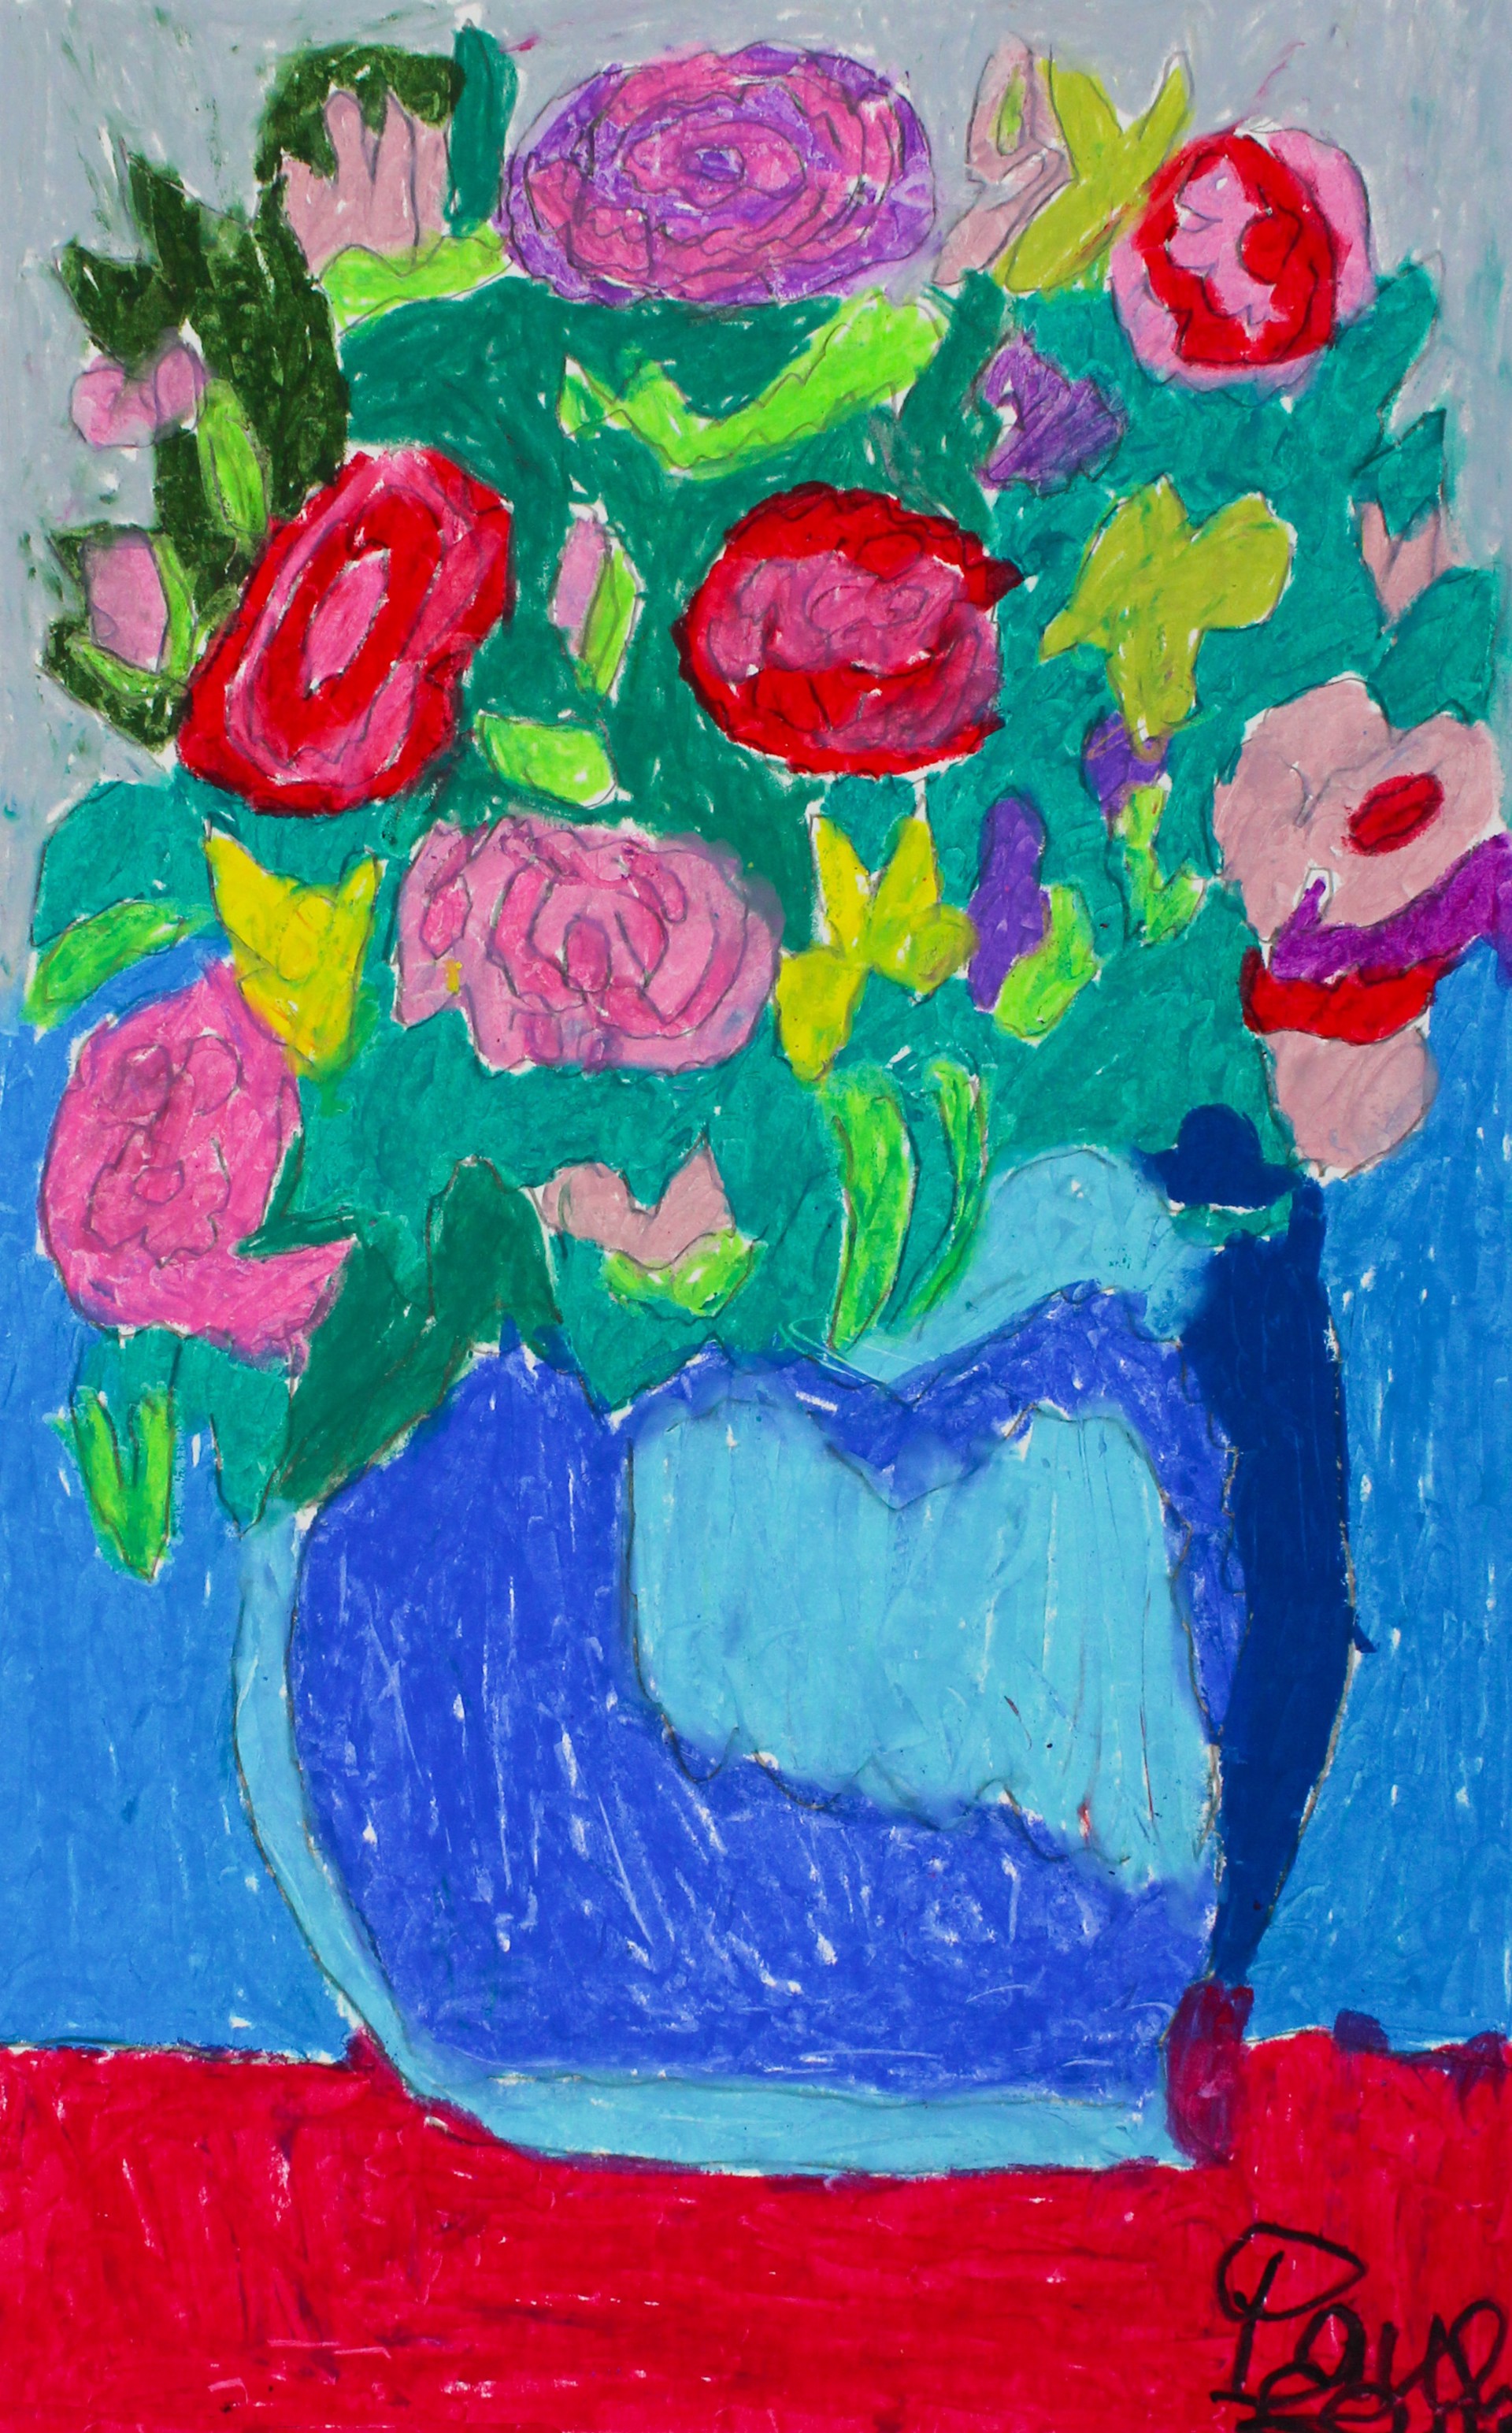 Flowers and Vase by Paul Lewis